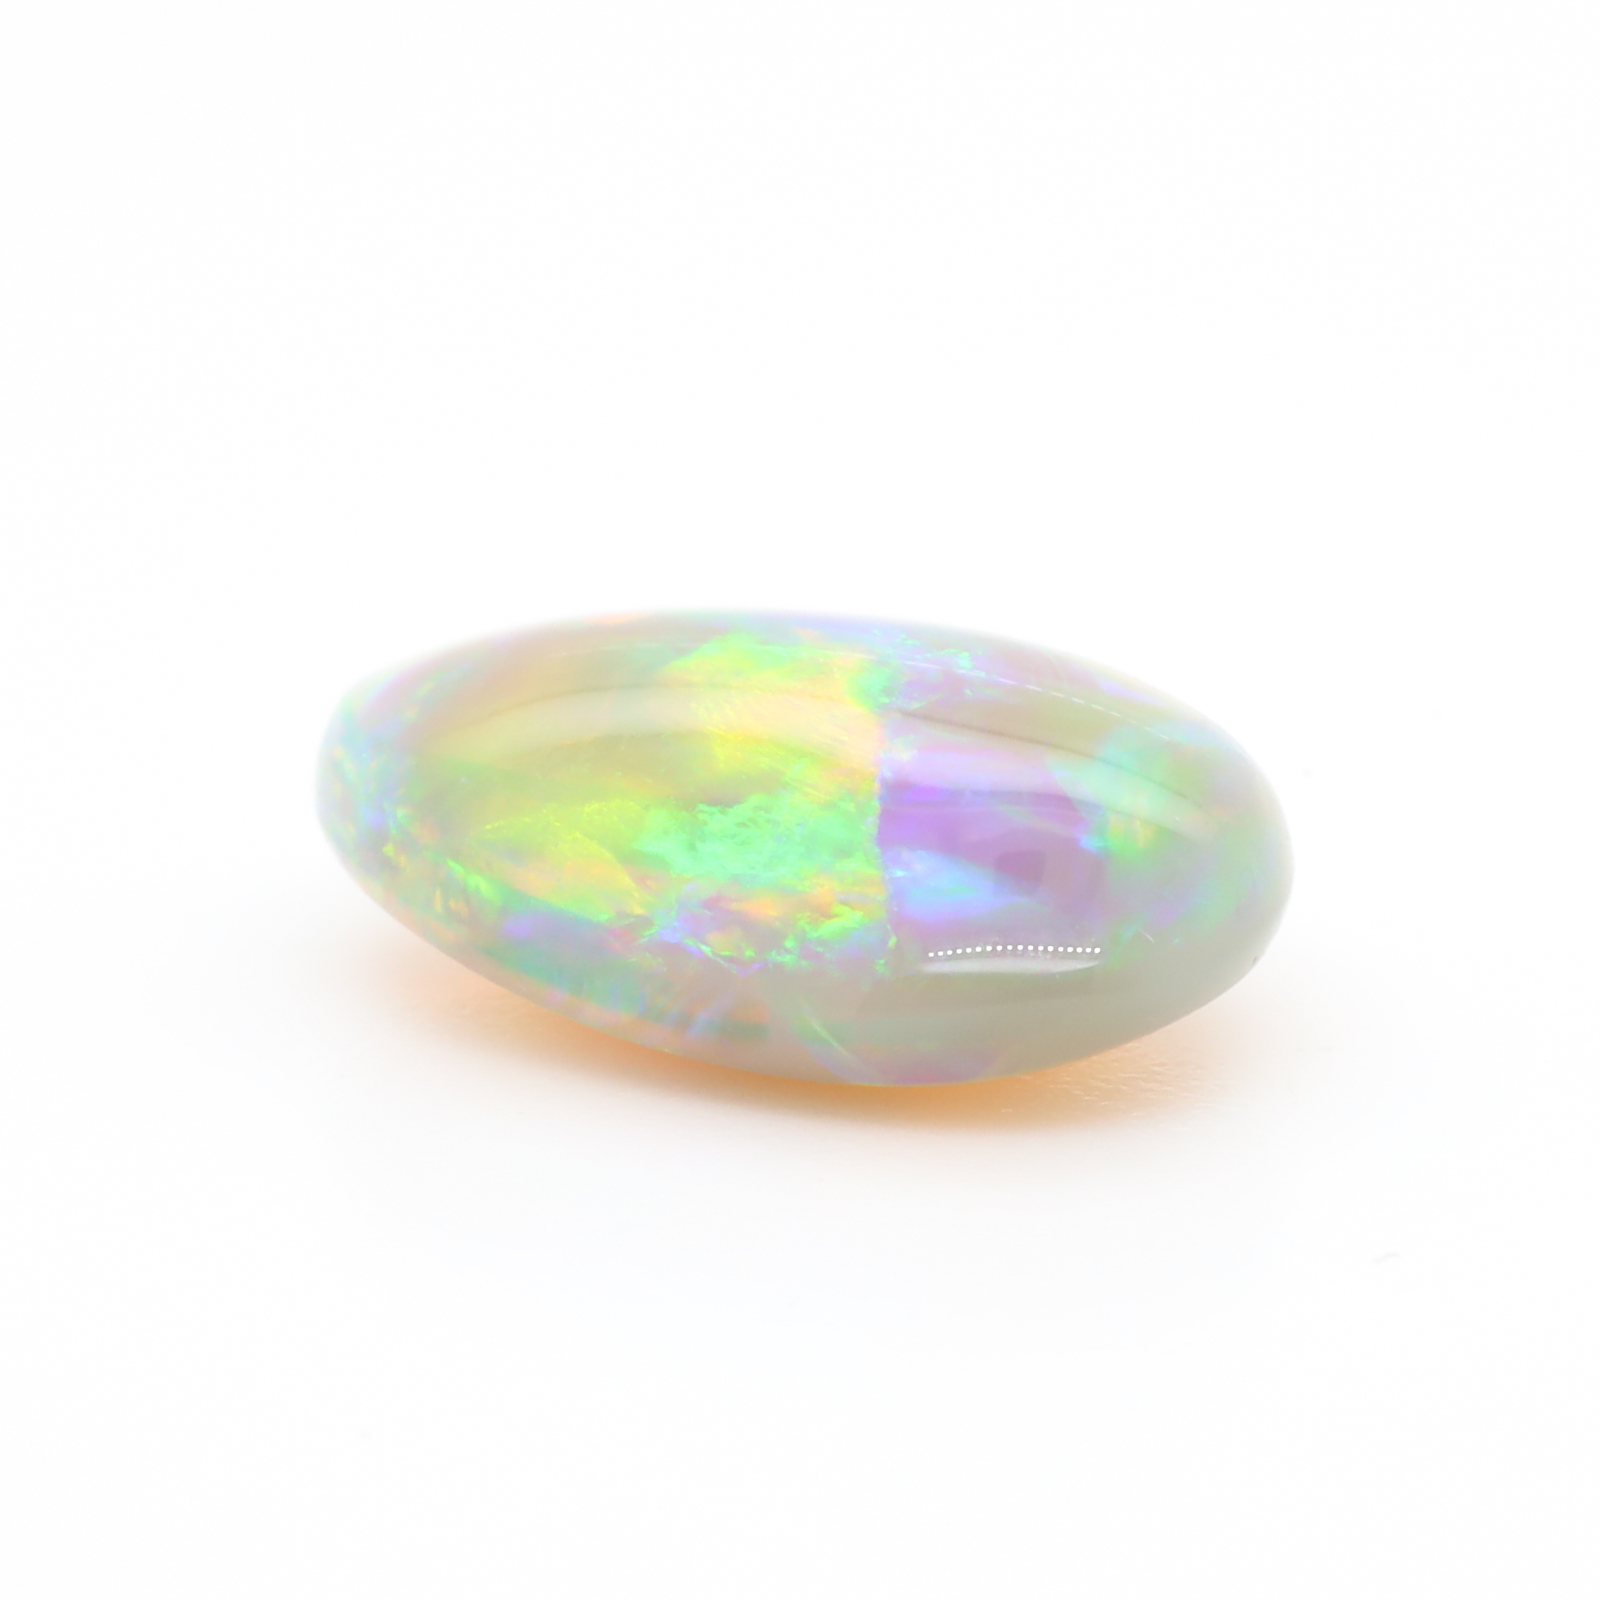 Green, Yellow and purple Solid Unset Crystal Opal